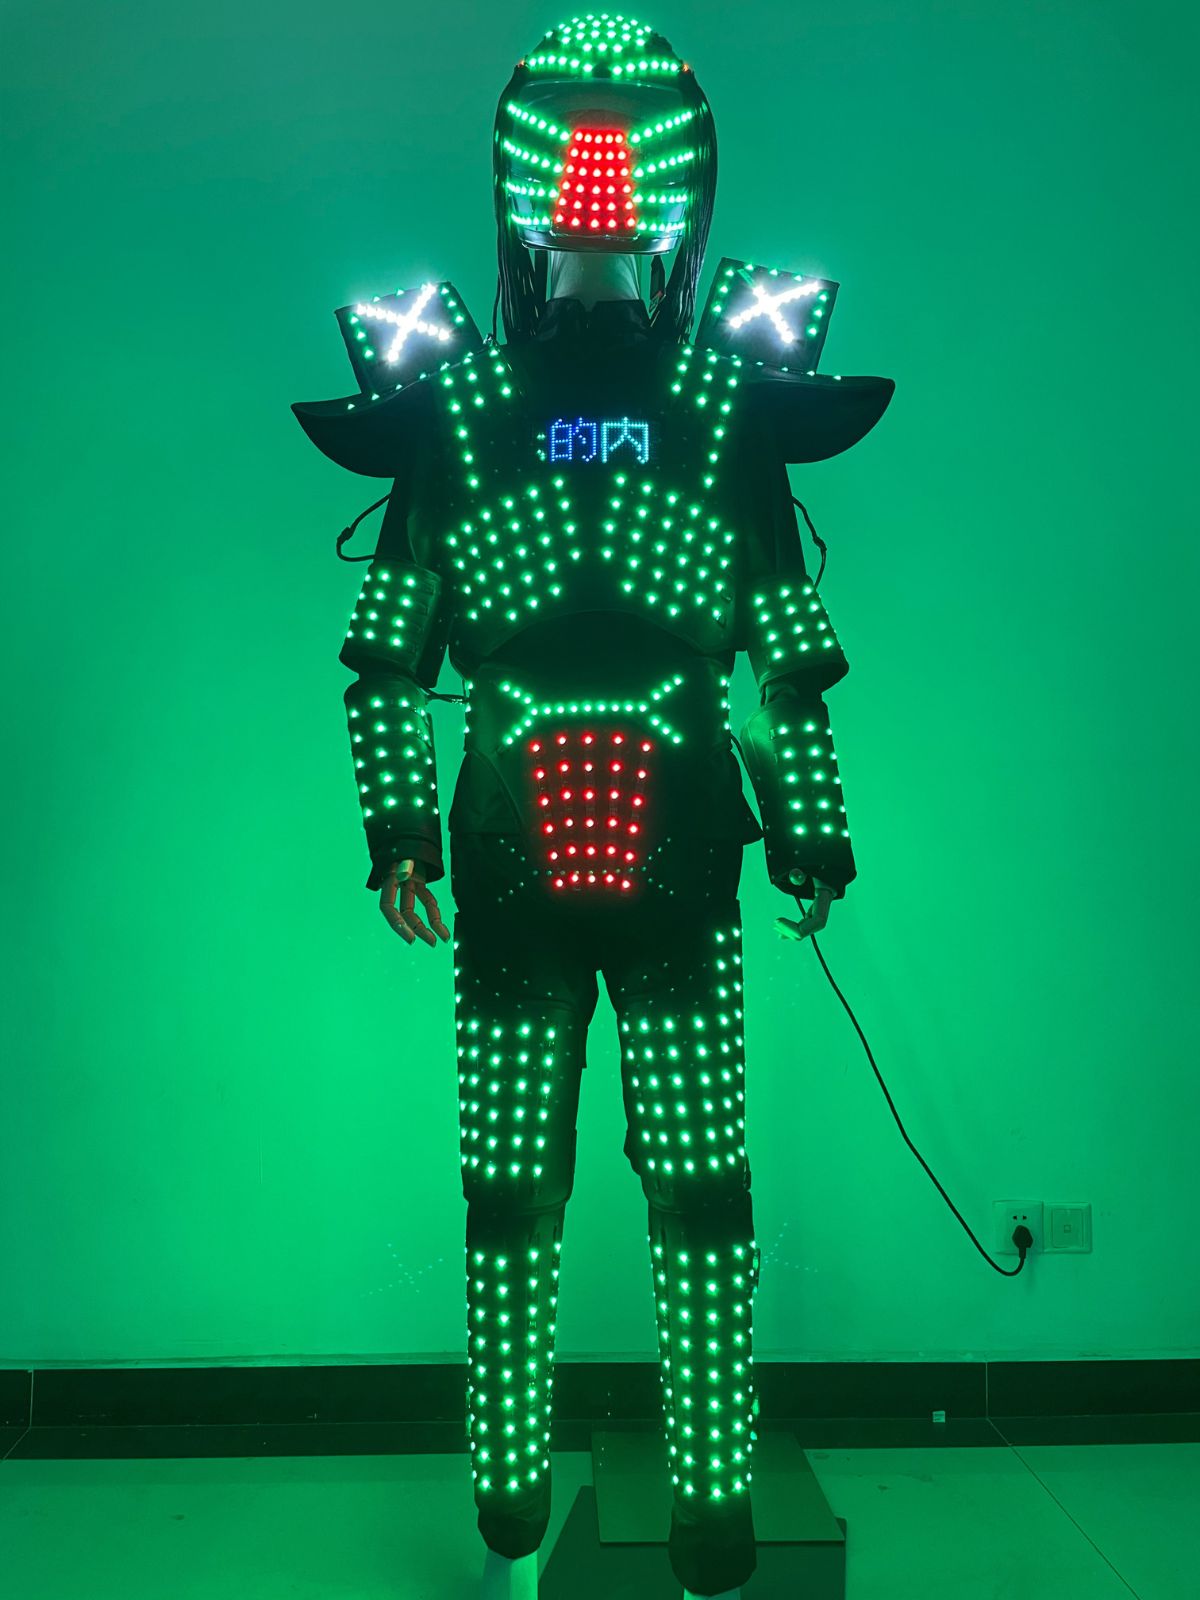 New LED Costumes Suits Lighting Up Costumes For Dancing Performance DJ Stage Show Entertainments